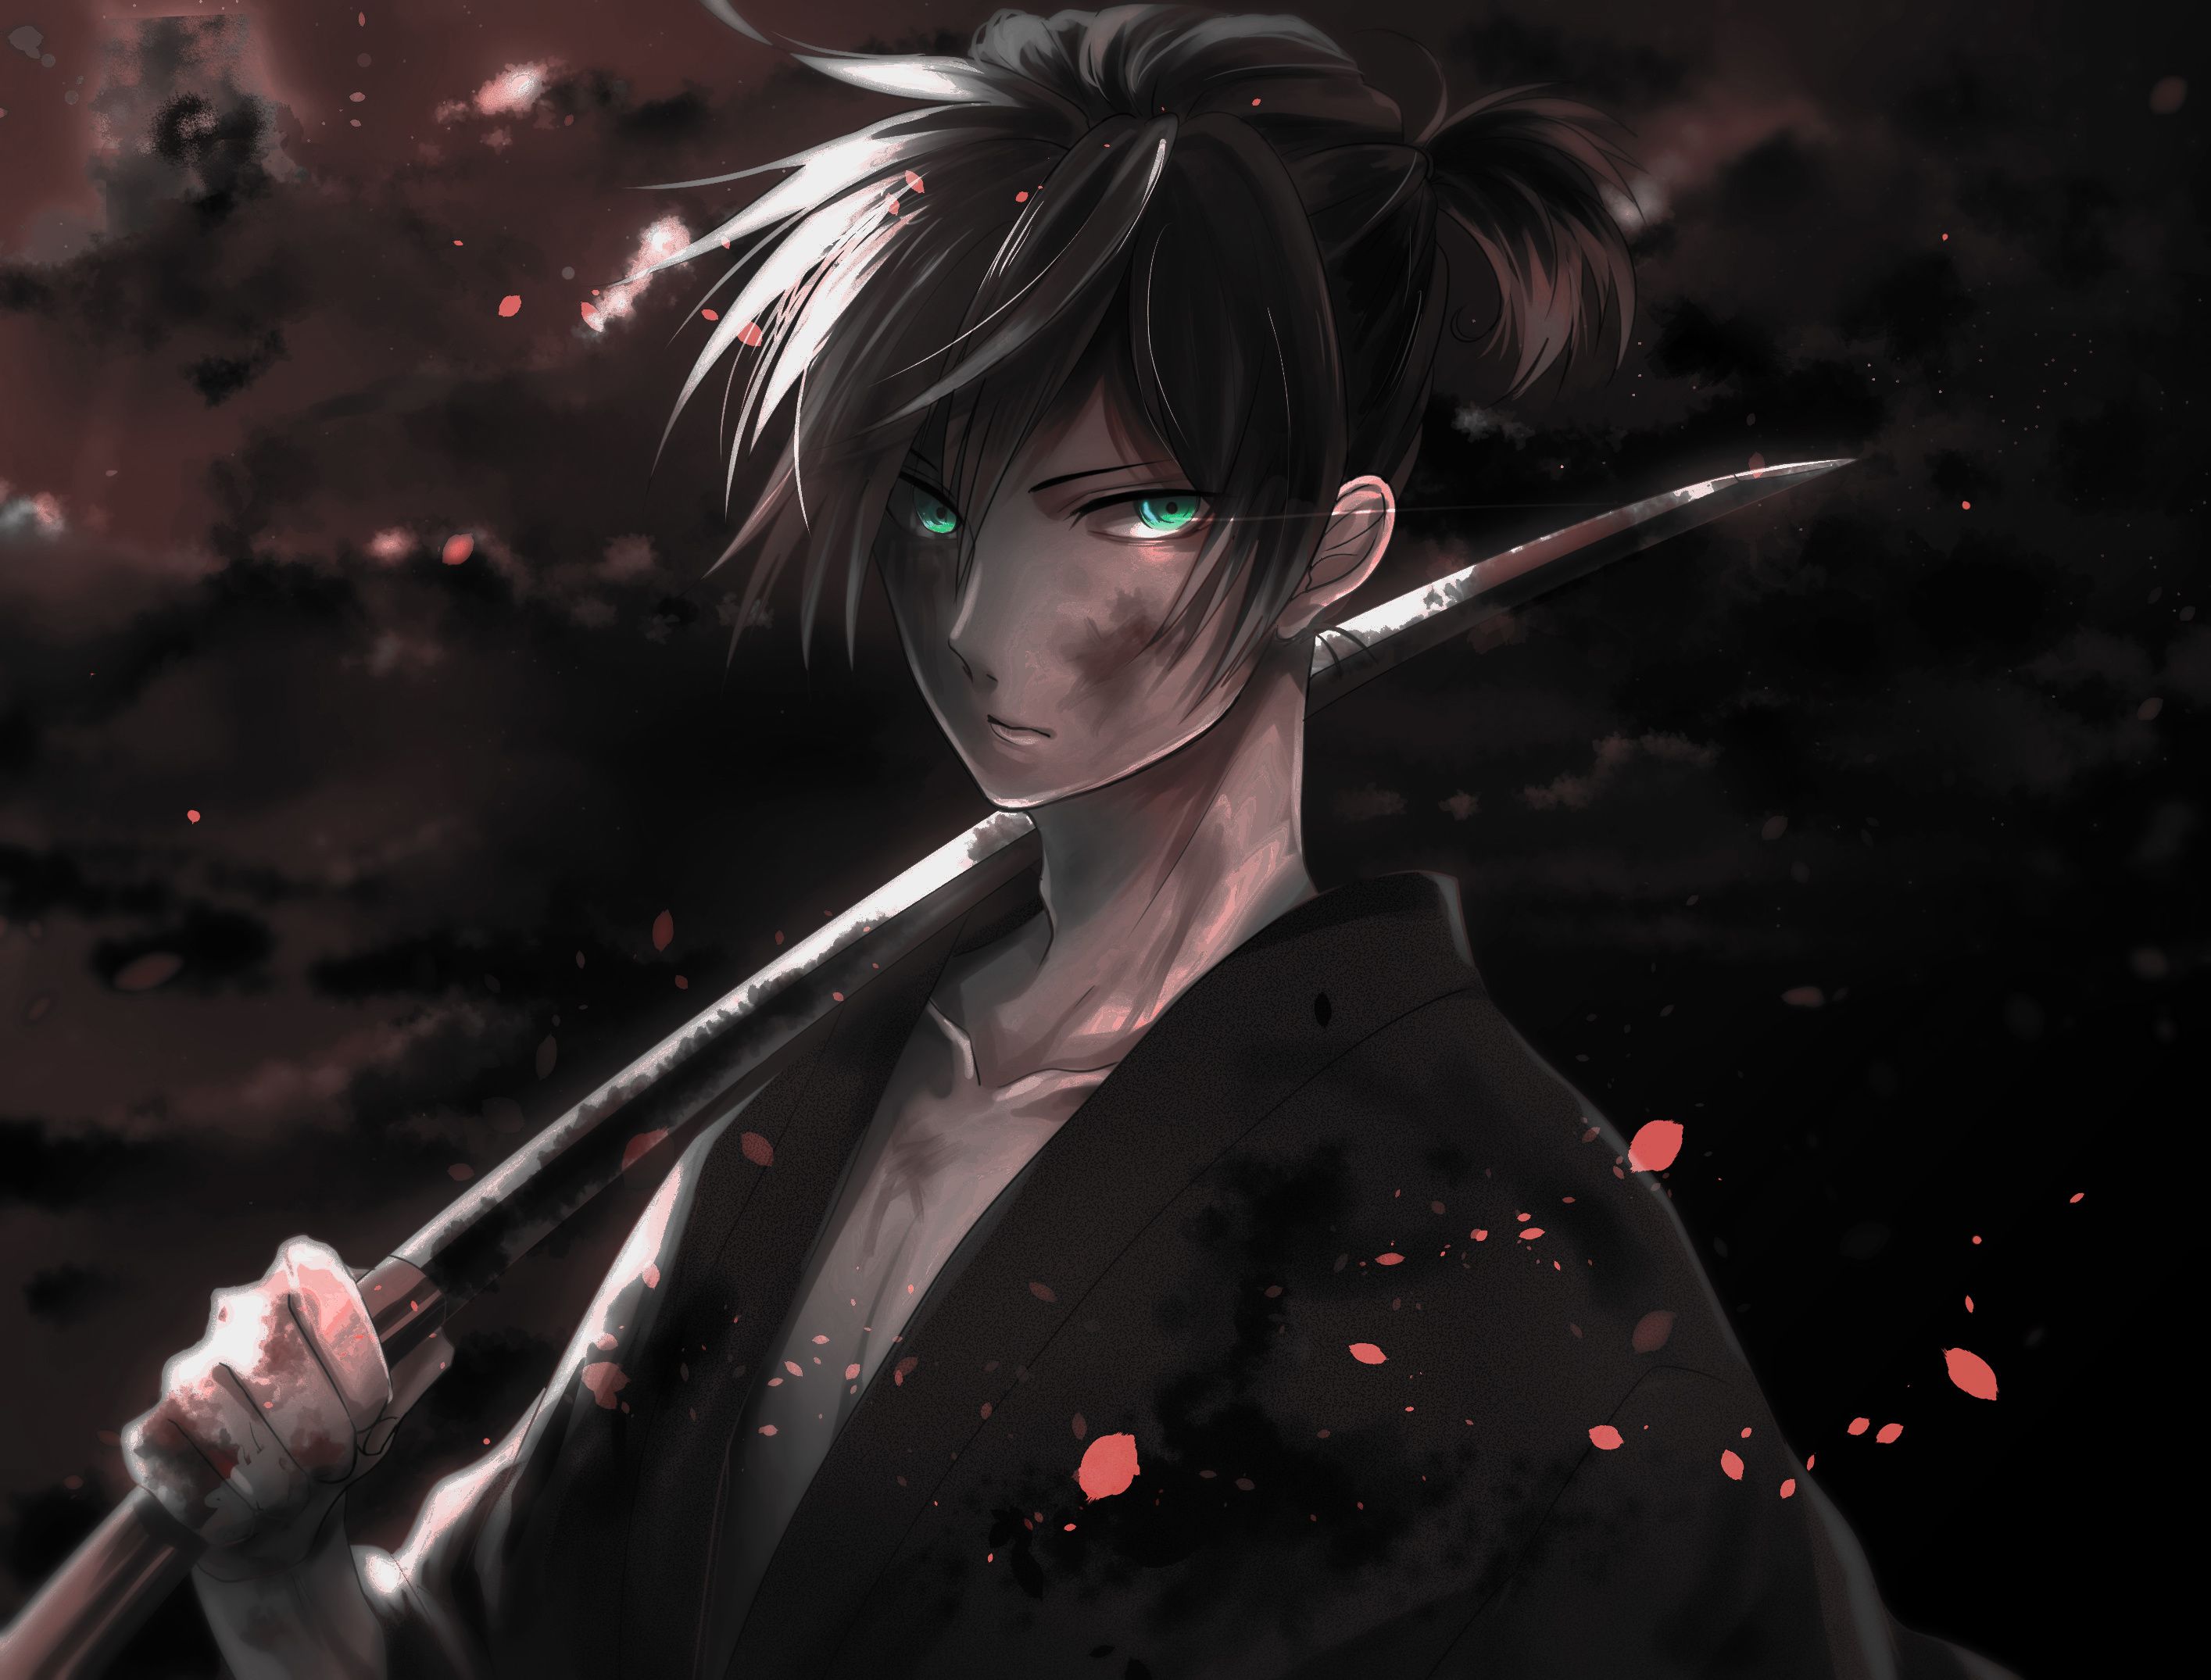 4. Yato from Noragami - wide 10